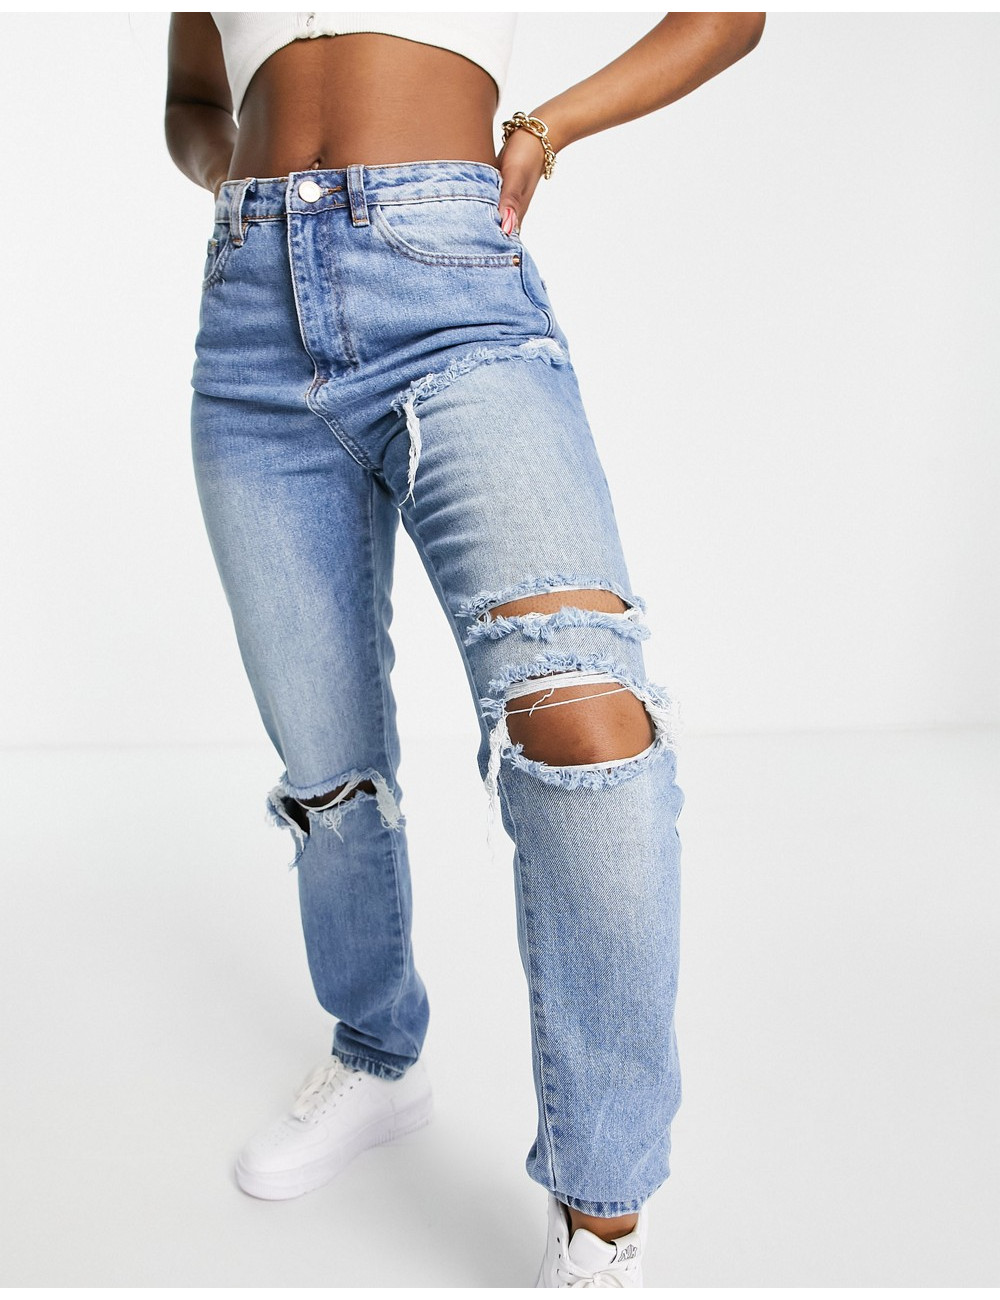 Missguided wrath jean with...